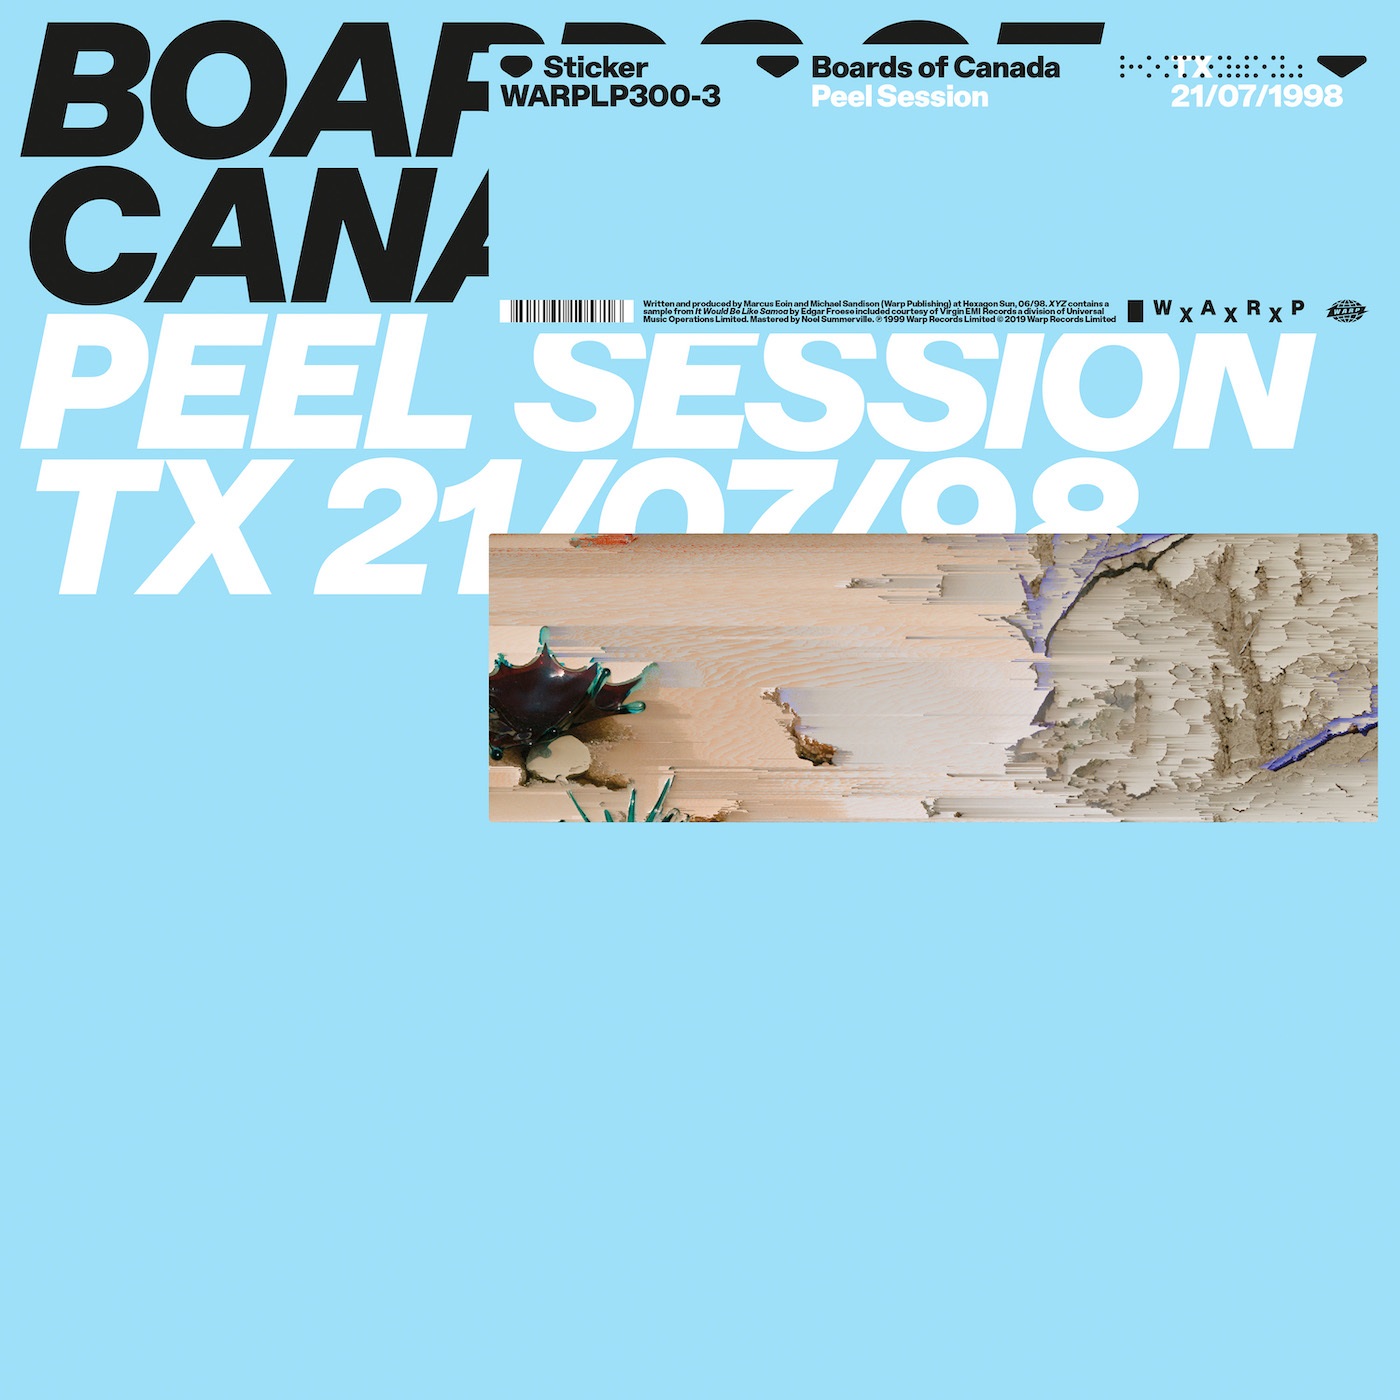 Boards of Canada – Peel Session (1999/2019) [FLAC 24bit/44,1kHz]